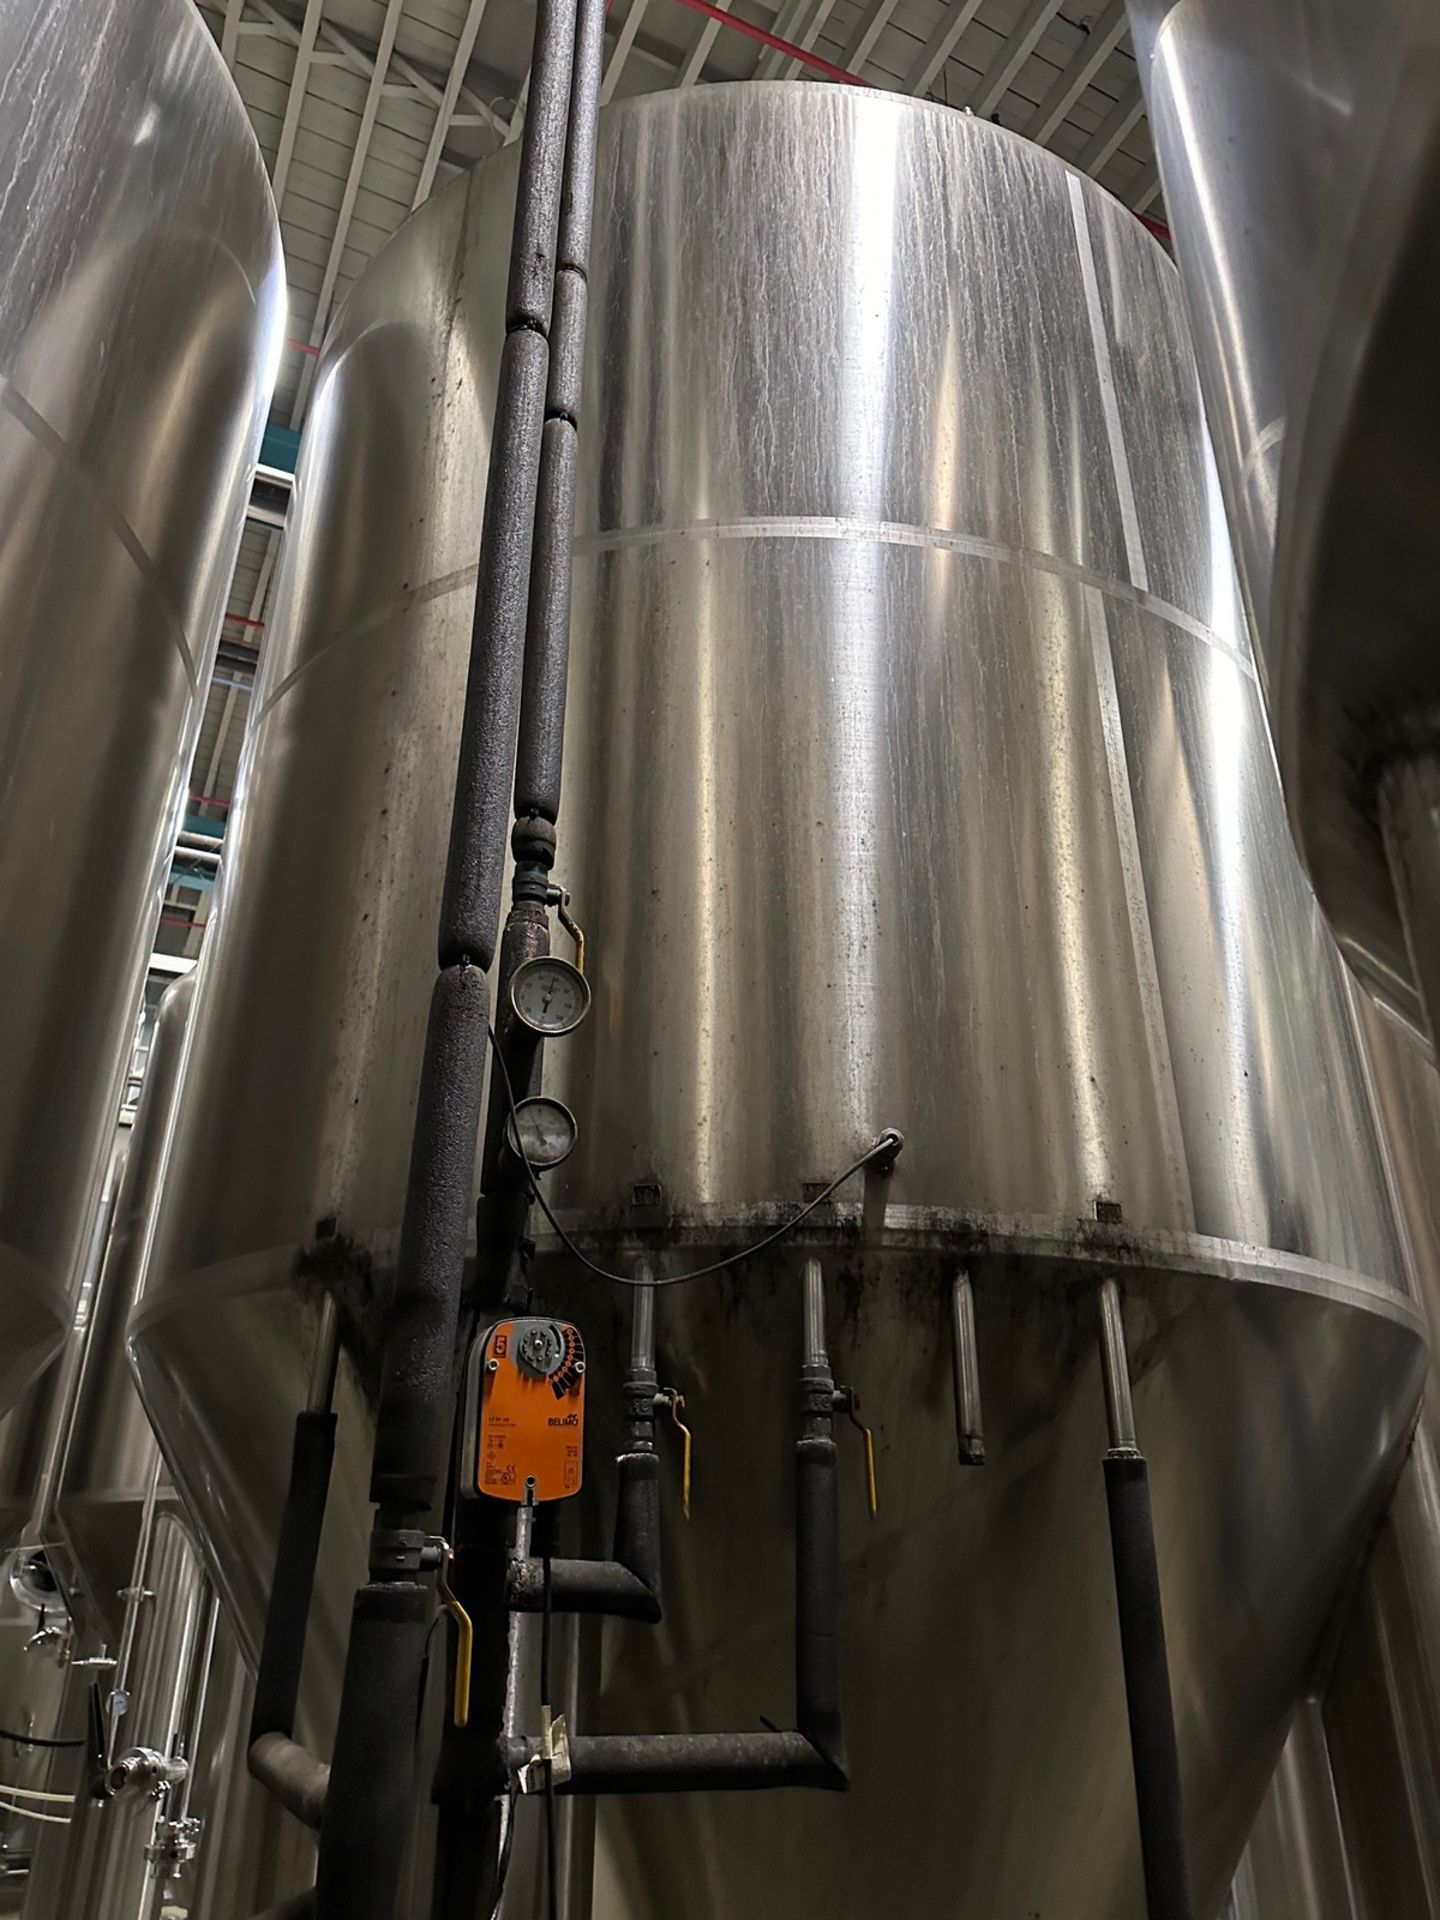 2015 Prospero SK 60 BBL Fermenter, Glycol Jacketed, Approx 7ft ID x 16ft OAH, S/N: 15103880 - Image 5 of 6